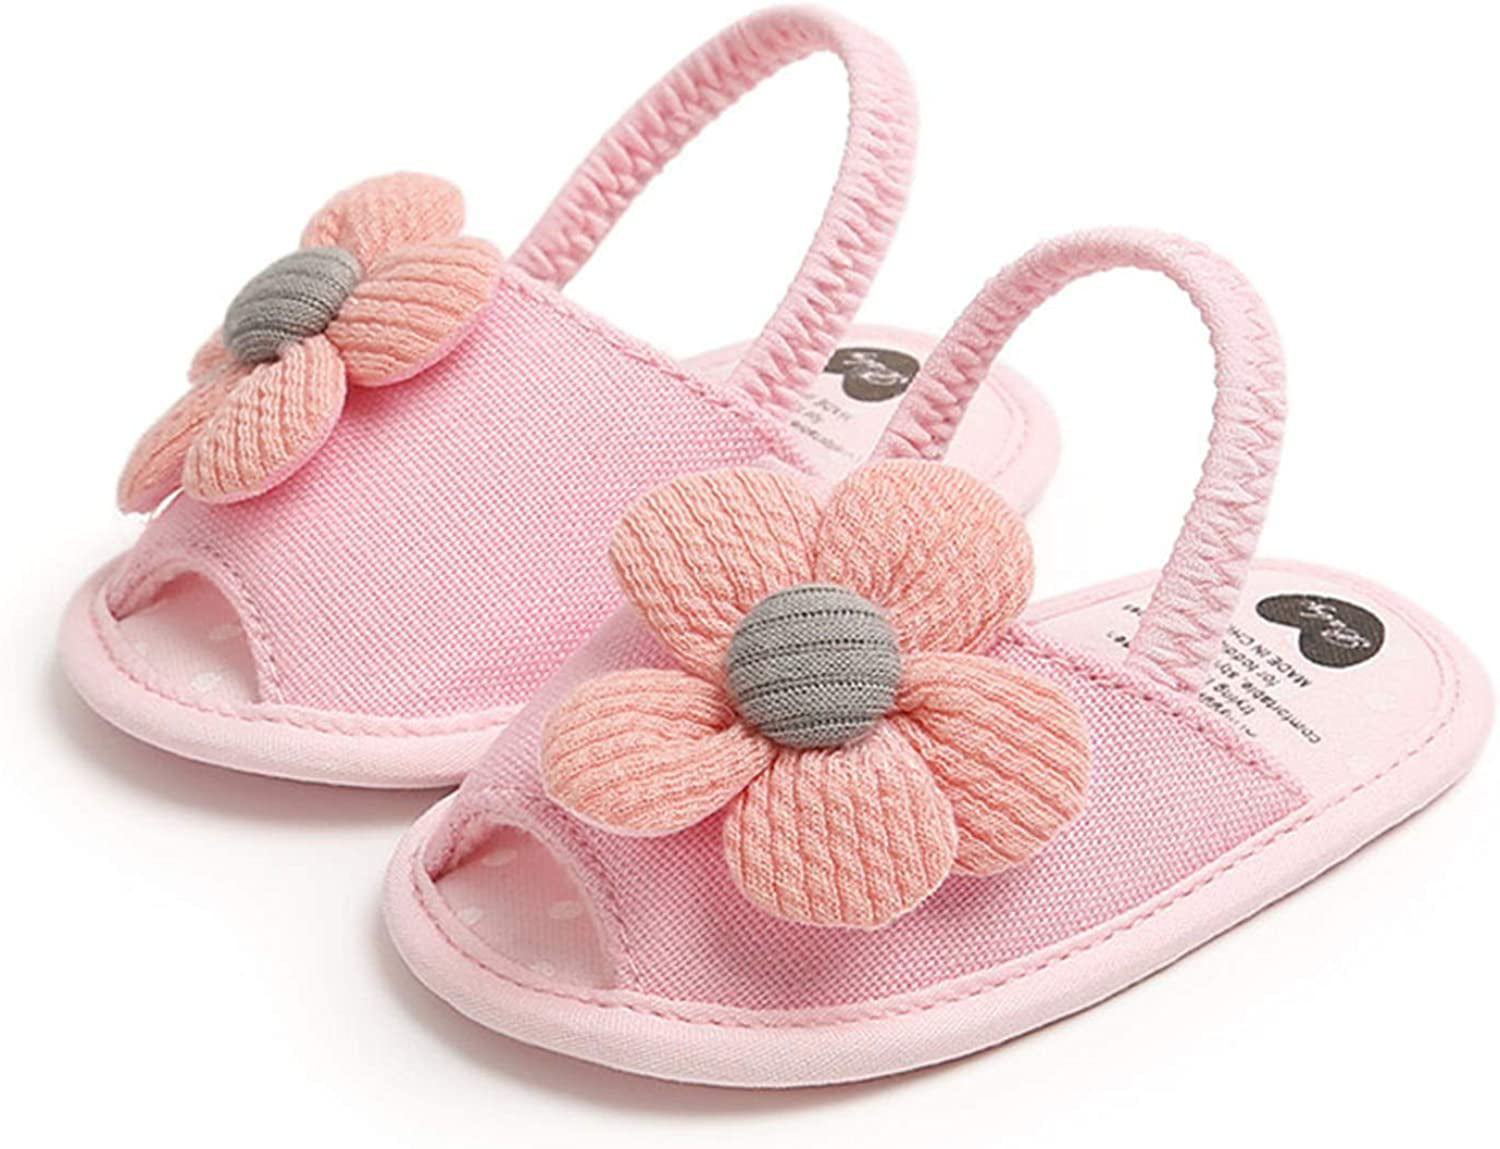 Meckior Infant Baby Girls Summer Flower Sandals Bowknot T-Strap Glittery Open-Toed Butterfly Shoes Soft Non-Slip Sole Princess Flat Shoes 